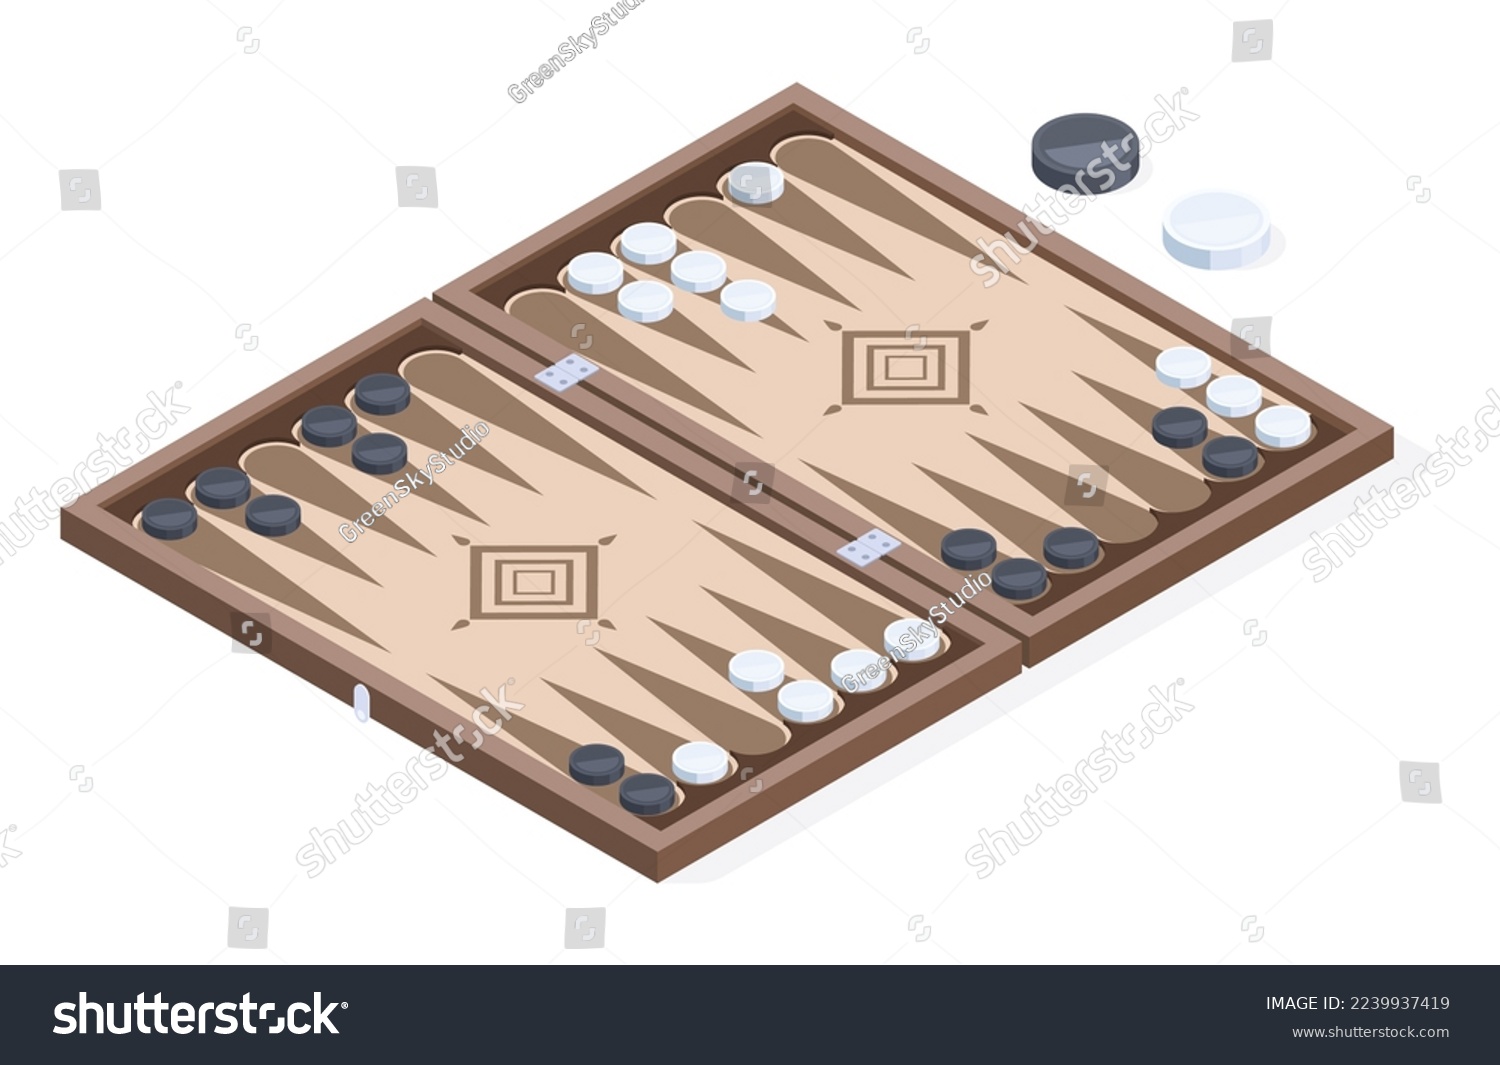 SVG of Isometric backgammon board game. Leisure table gaming, recreation backgammon game, Turkish, Lebanese, Arabic traditional game 3d vector illustration isolated on white background svg